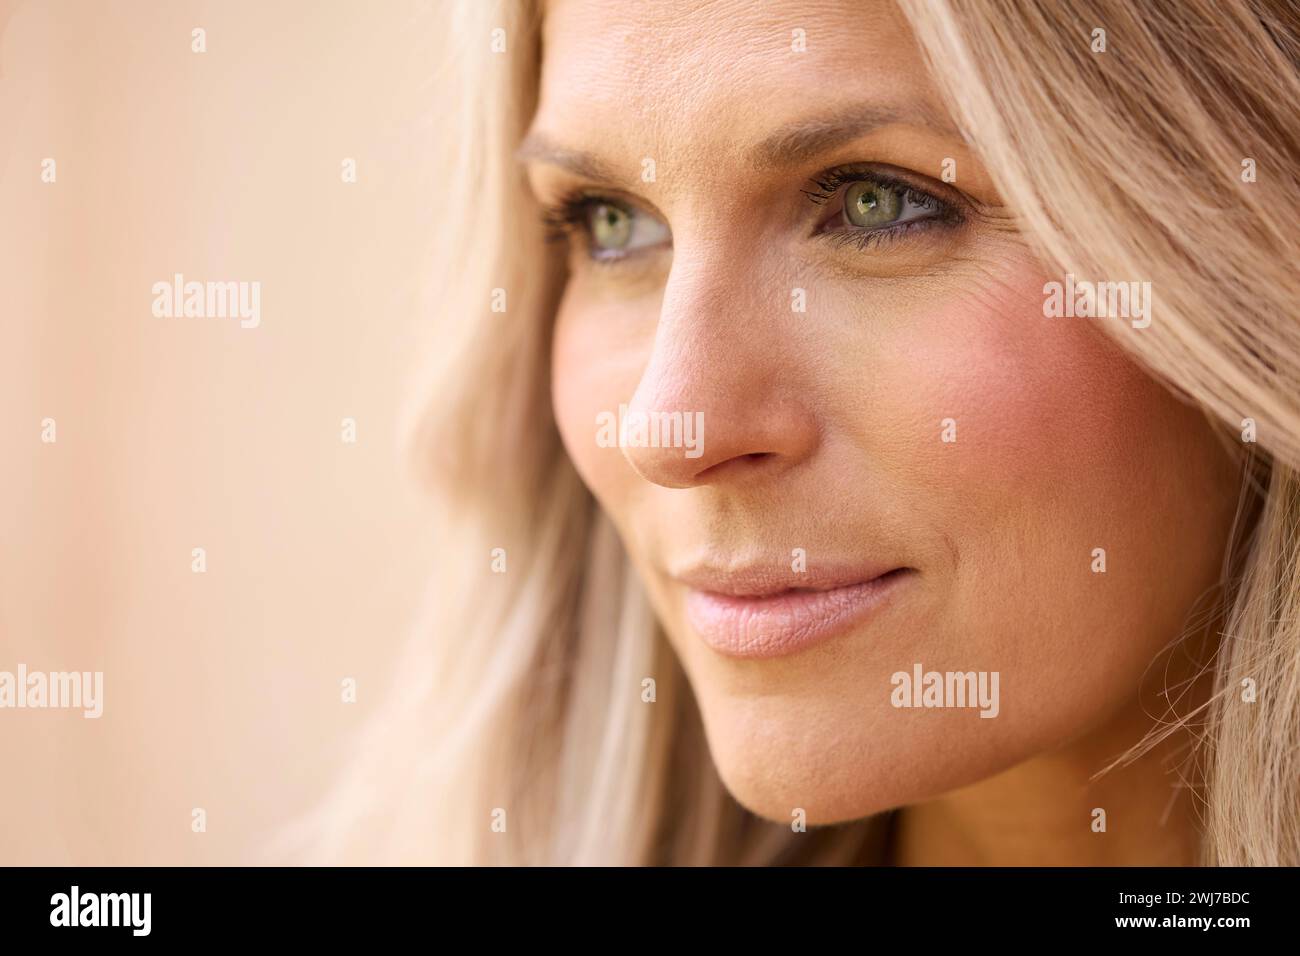 Portrait of smiling mature woman in empty room stock photo